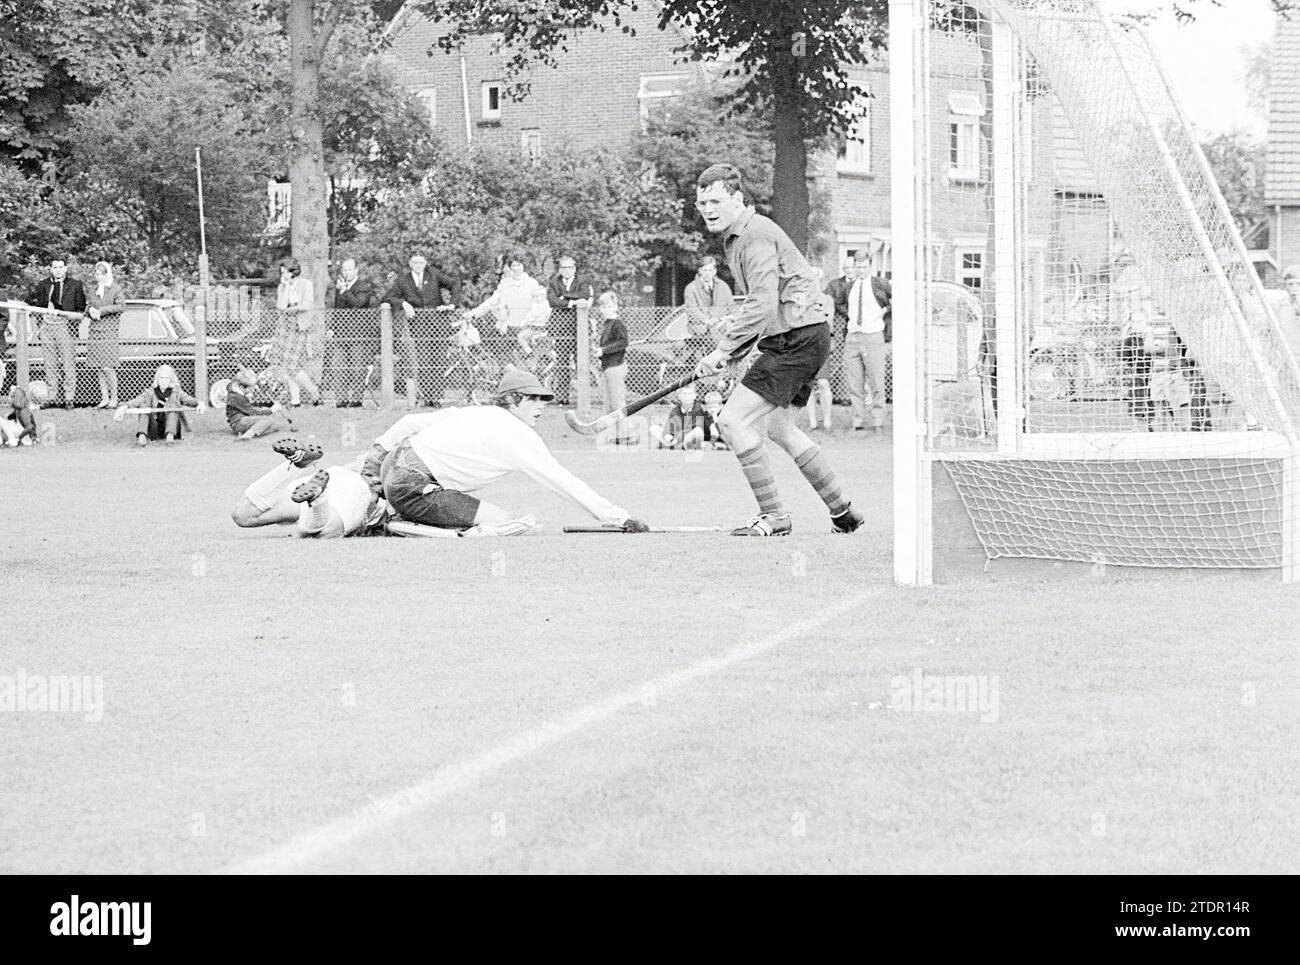 B.M.H.C. - S.C.H.C., Hockey, 17-09-1967, Whizgle News from the Past, Tailored for the Future. Explore historical narratives, Dutch The Netherlands agency image with a modern perspective, bridging the gap between yesterday's events and tomorrow's insights. A timeless journey shaping the stories that shape our future Stock Photo